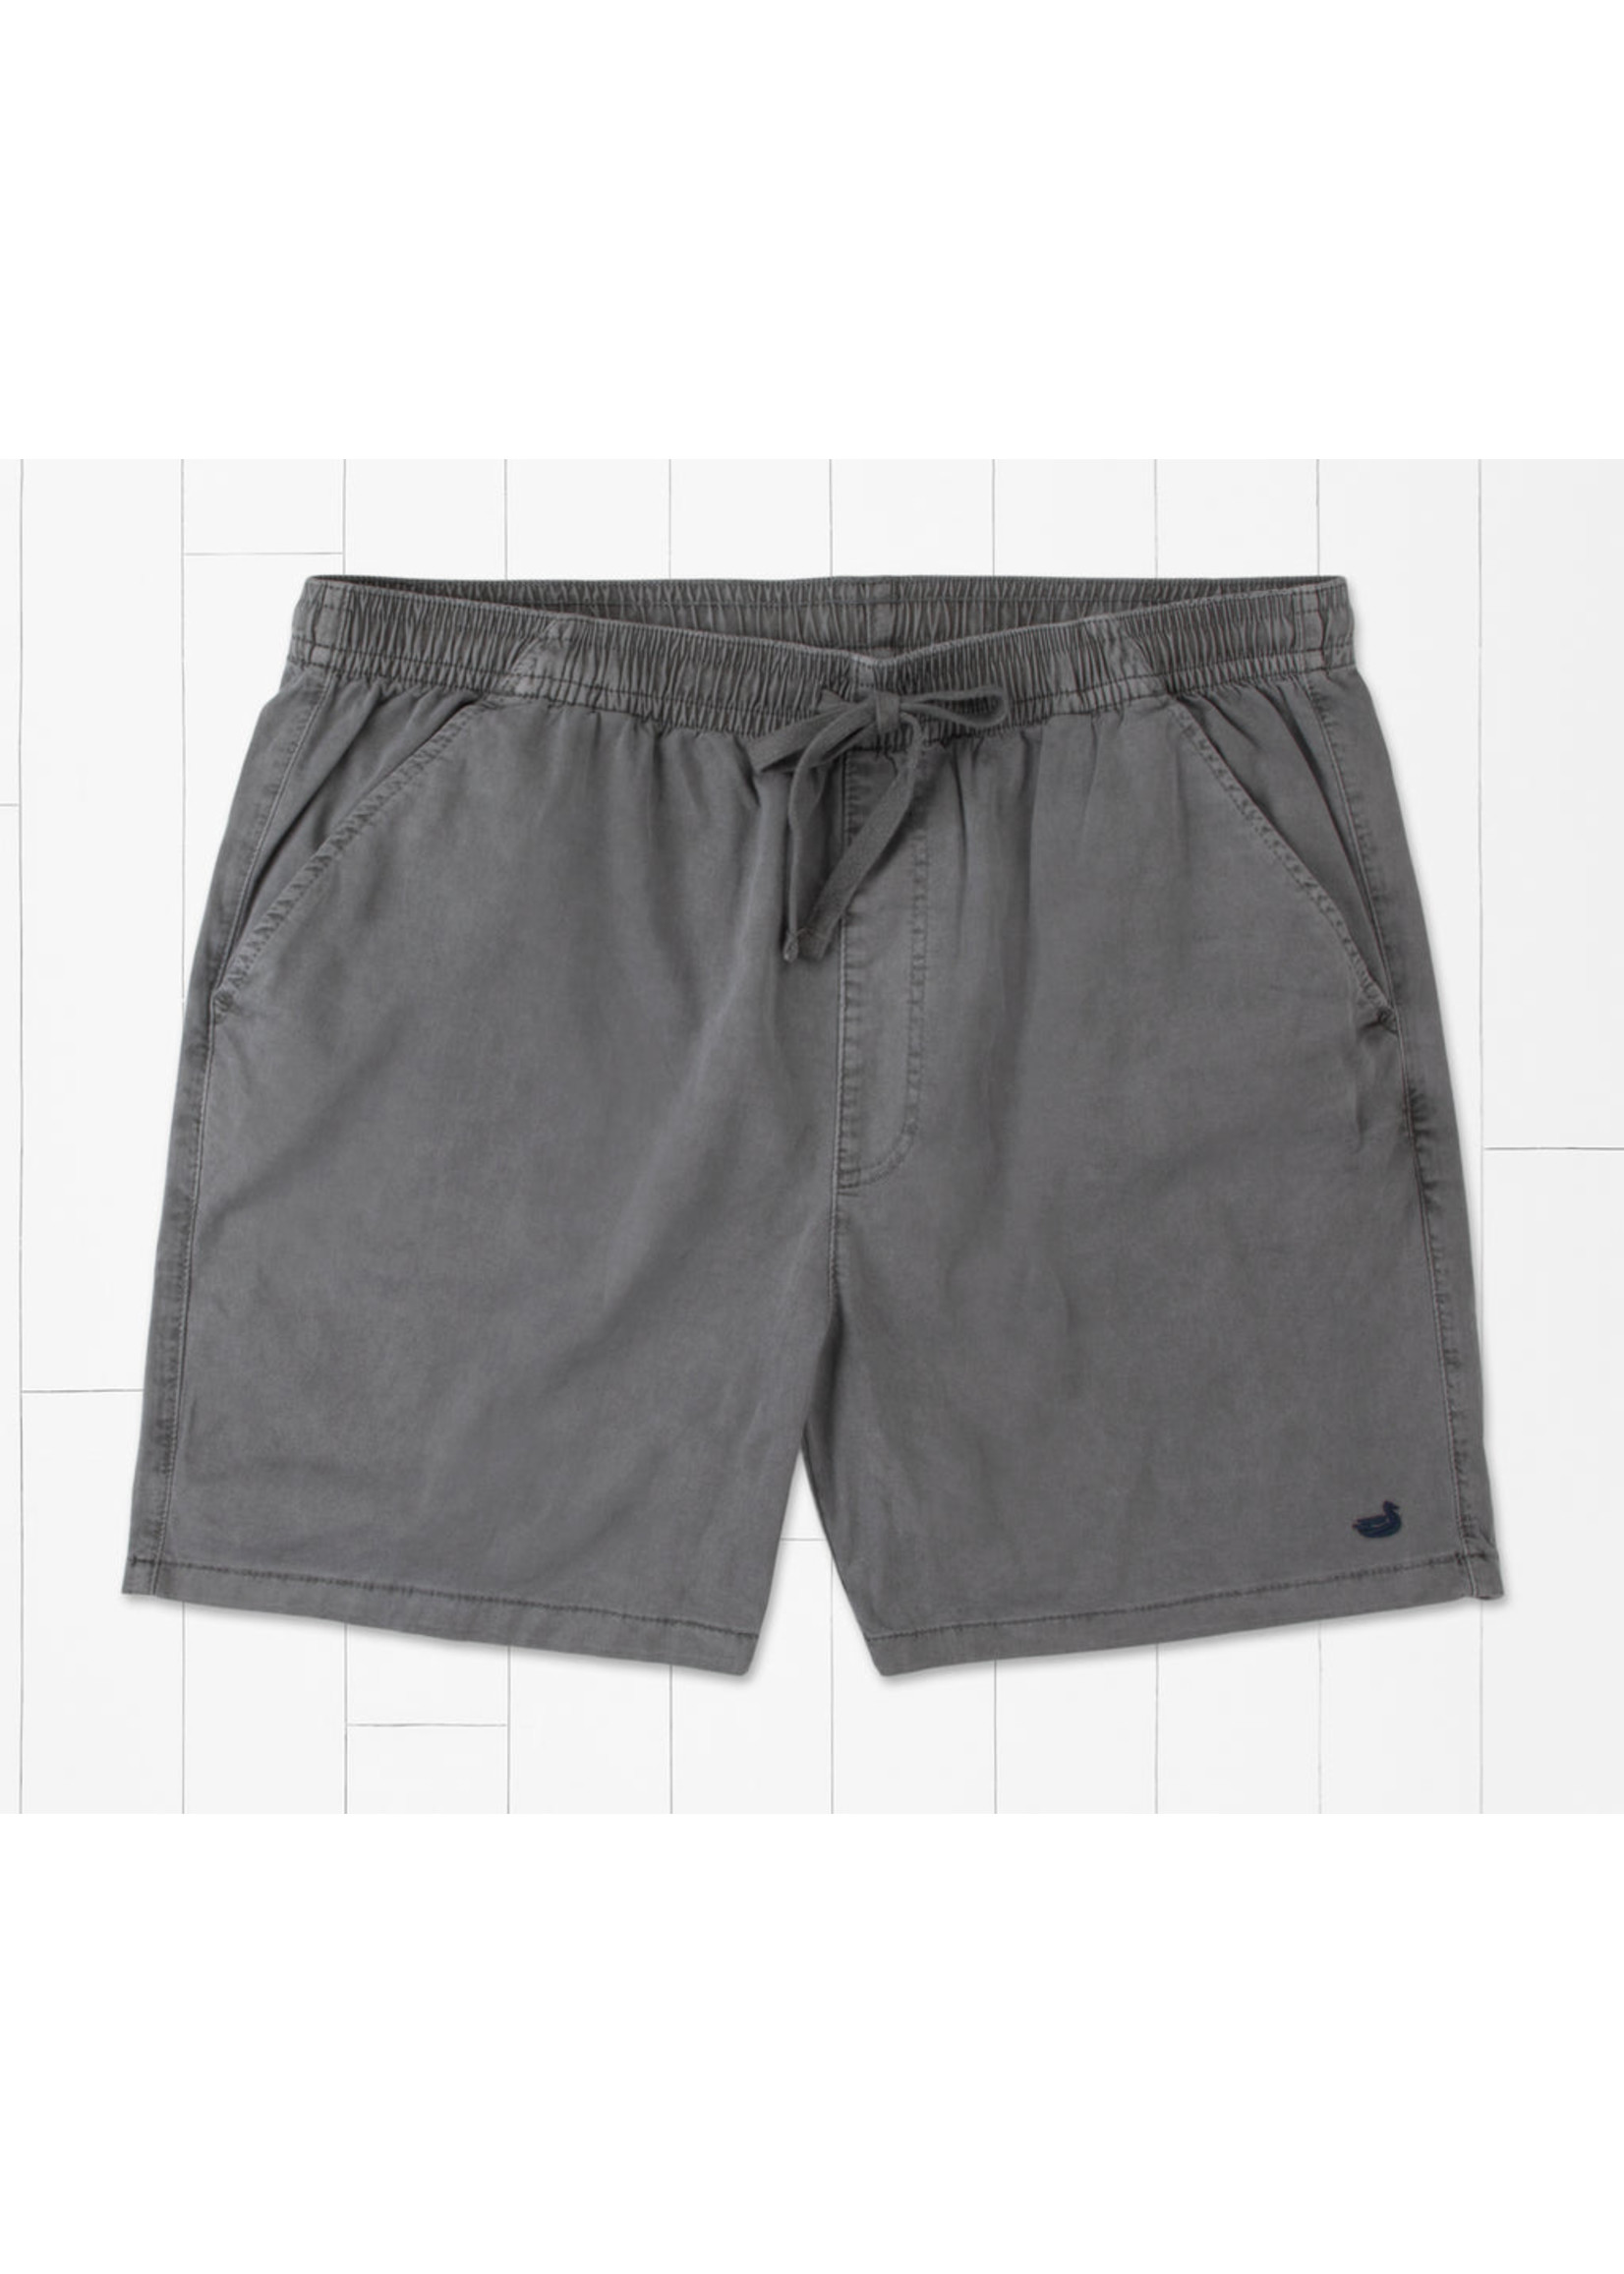 Southern Marsh Hartwell Washed Short